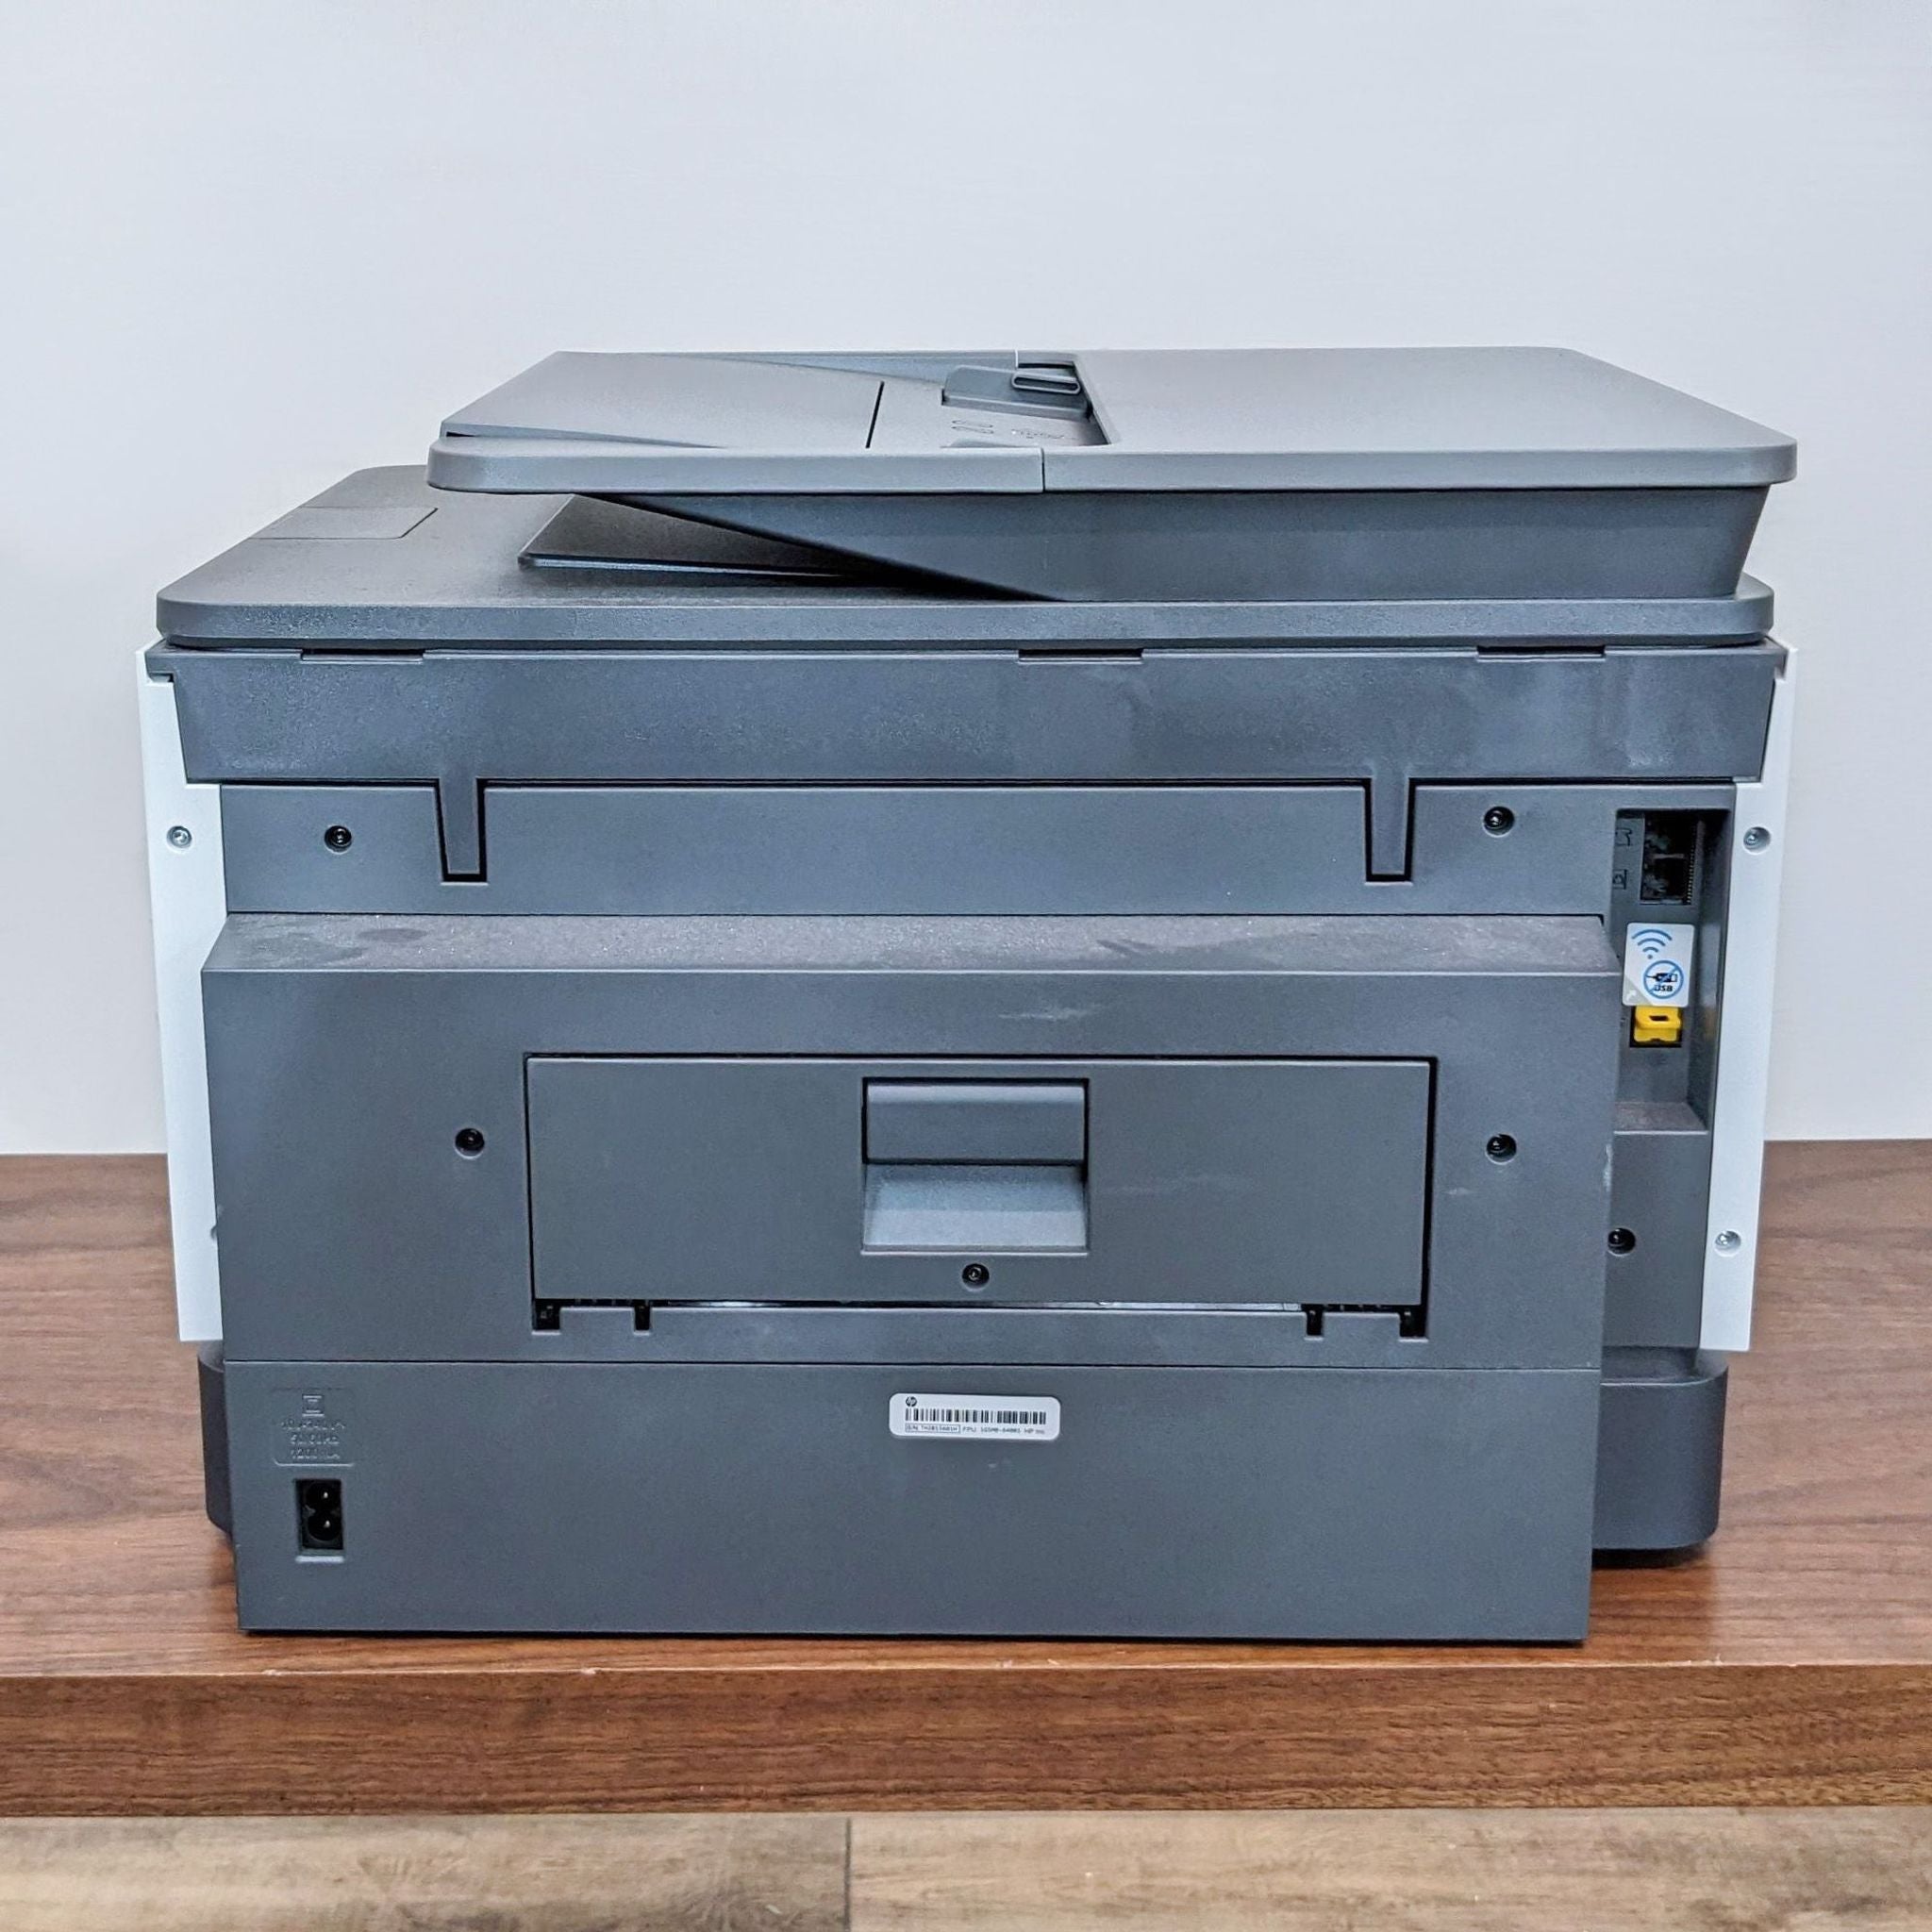 HP All-in-One wireless printer with printing, scanning, and copying functions, featuring a touch screen interface on a wooden desk.